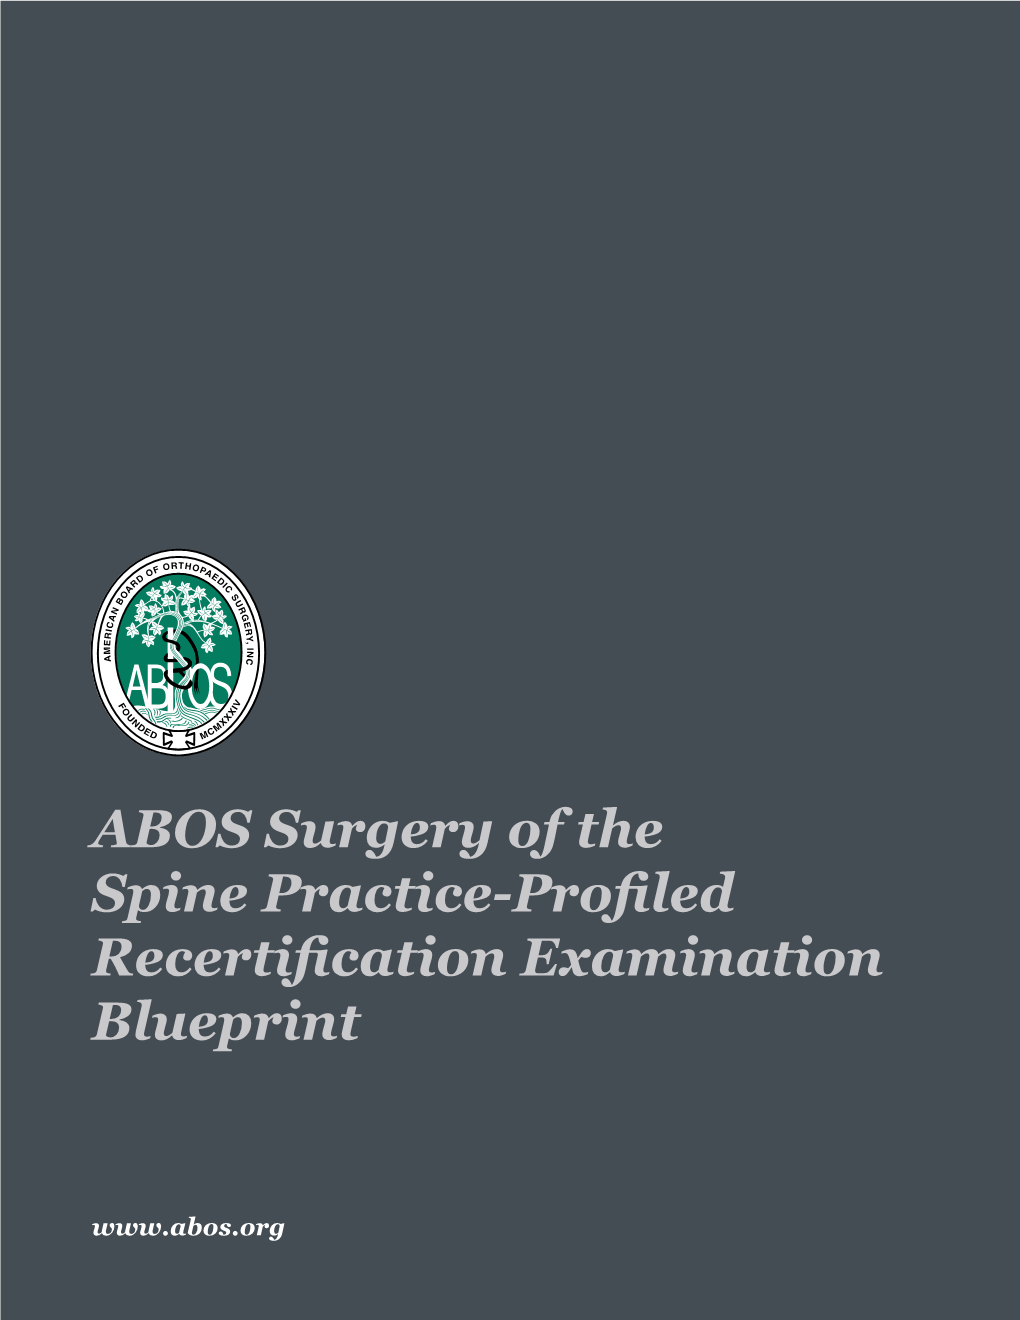 ABOS Surgery of the Spine Practice-Profiled Recertification Examination Blueprint